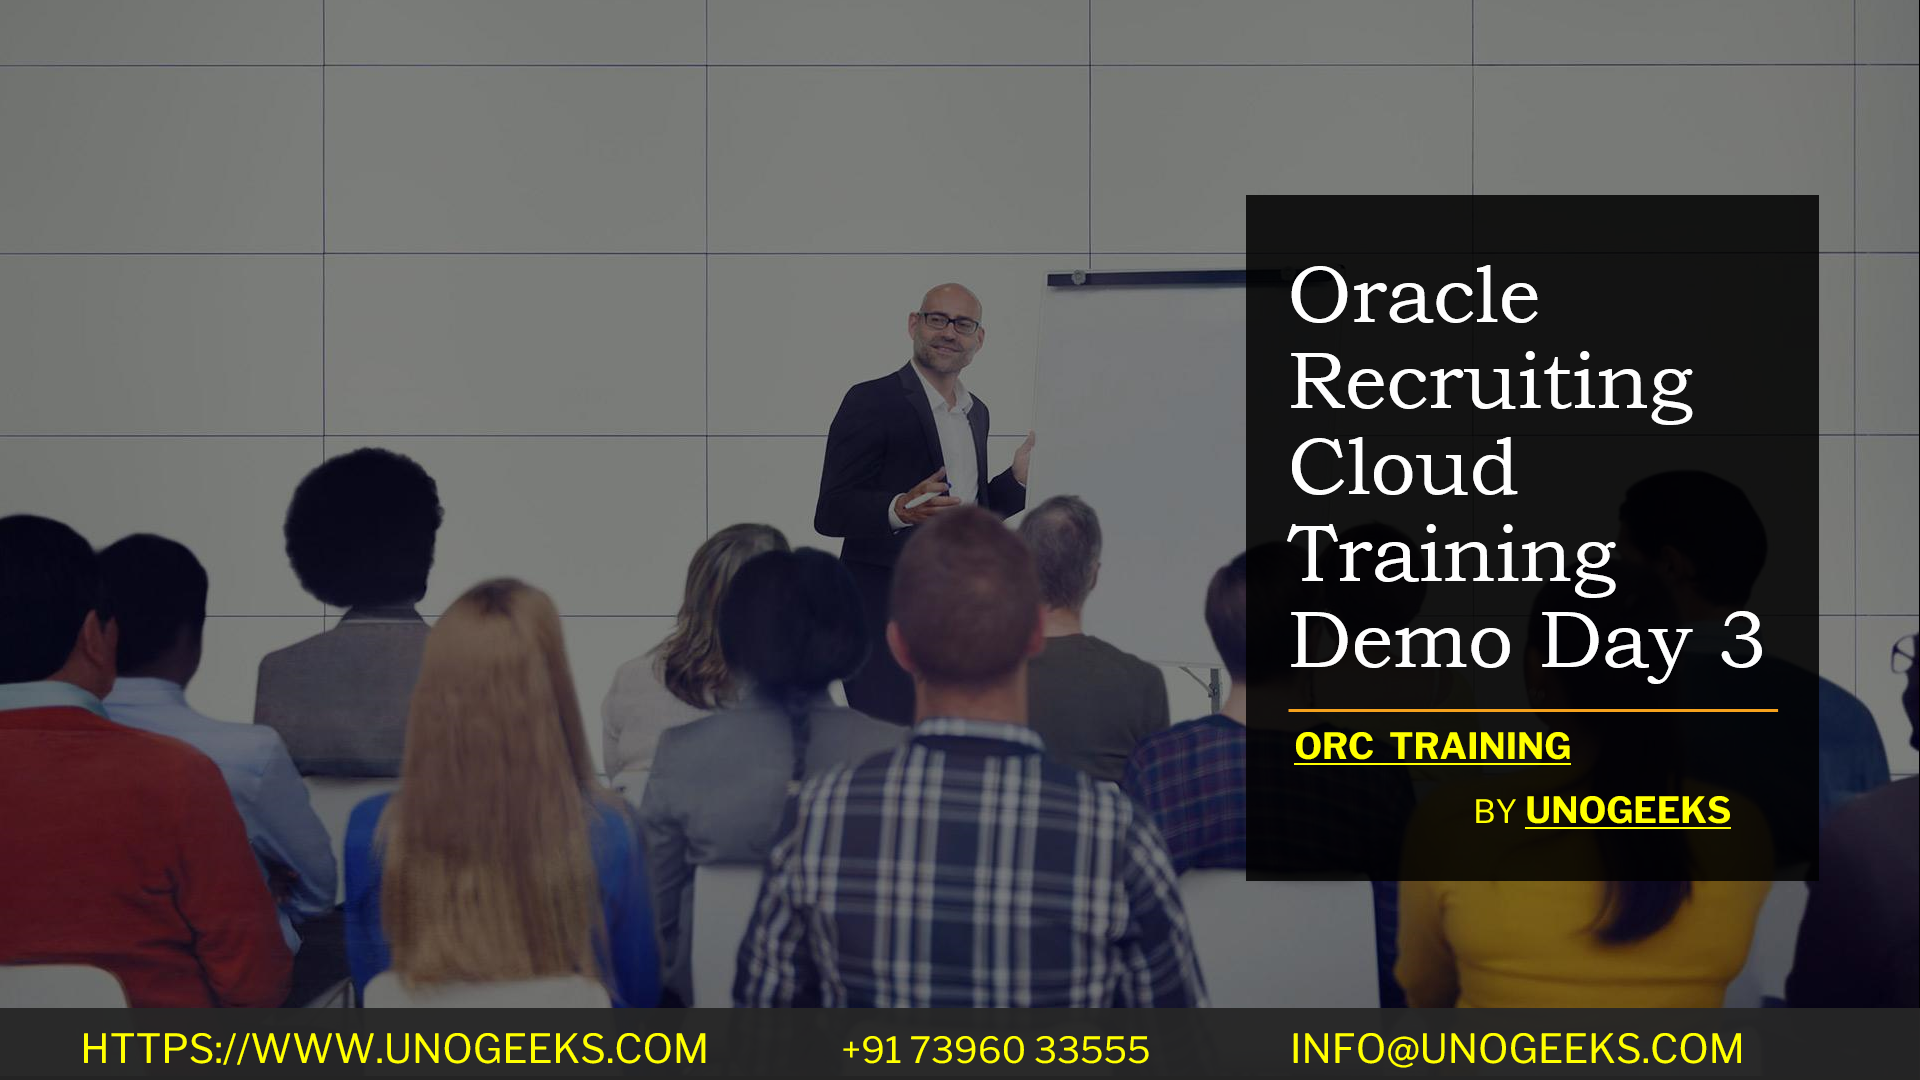 Oracle Recruiting Cloud Training Demo Day 3